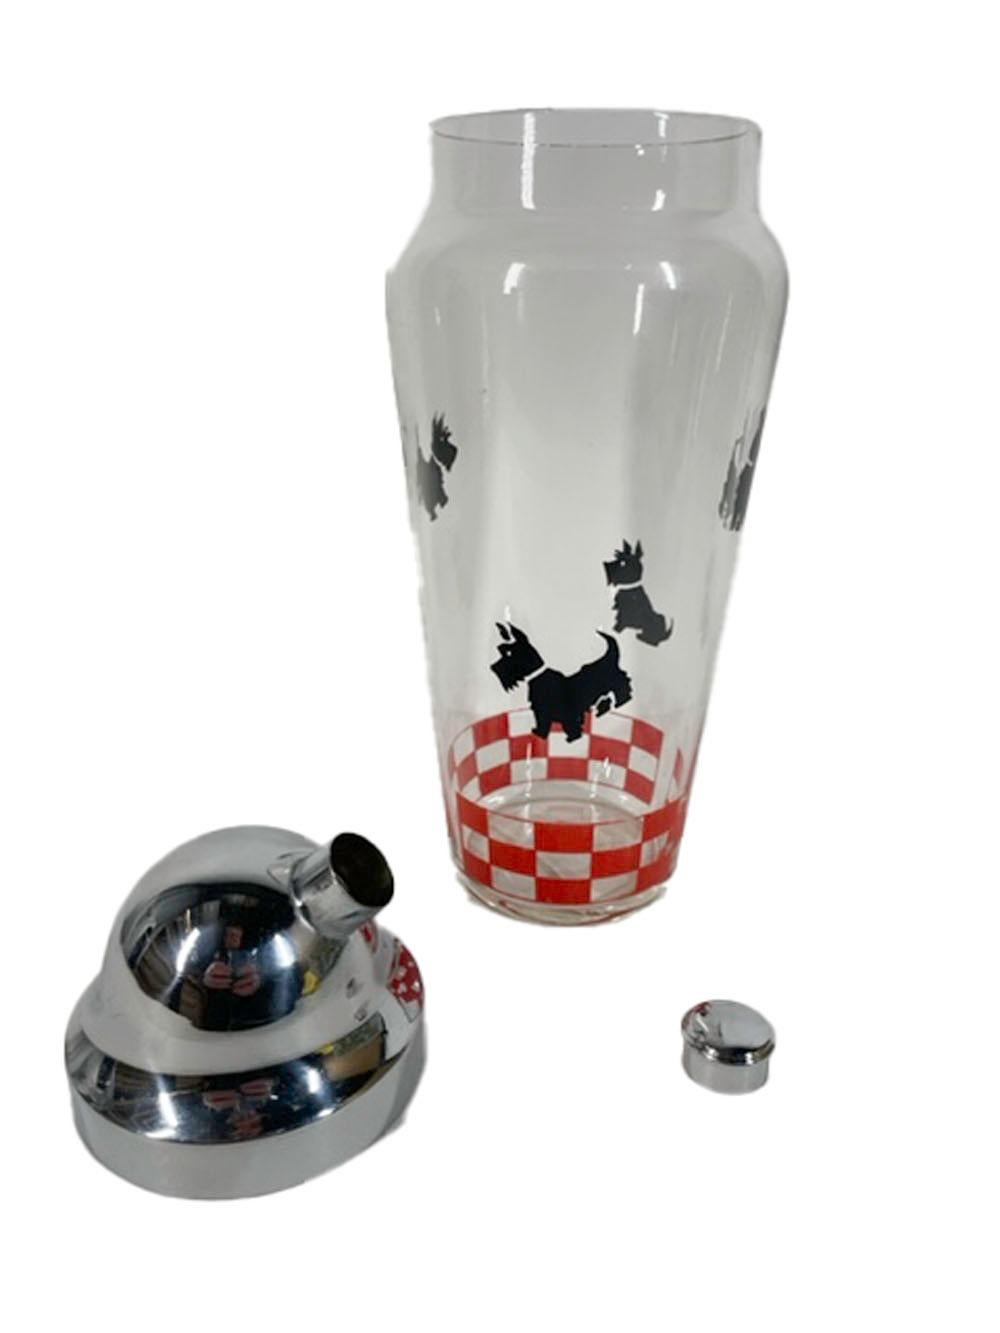 American Art Deco, Hazel Atlas Cocktail Shaker with Black Scotties and Red Check Band For Sale